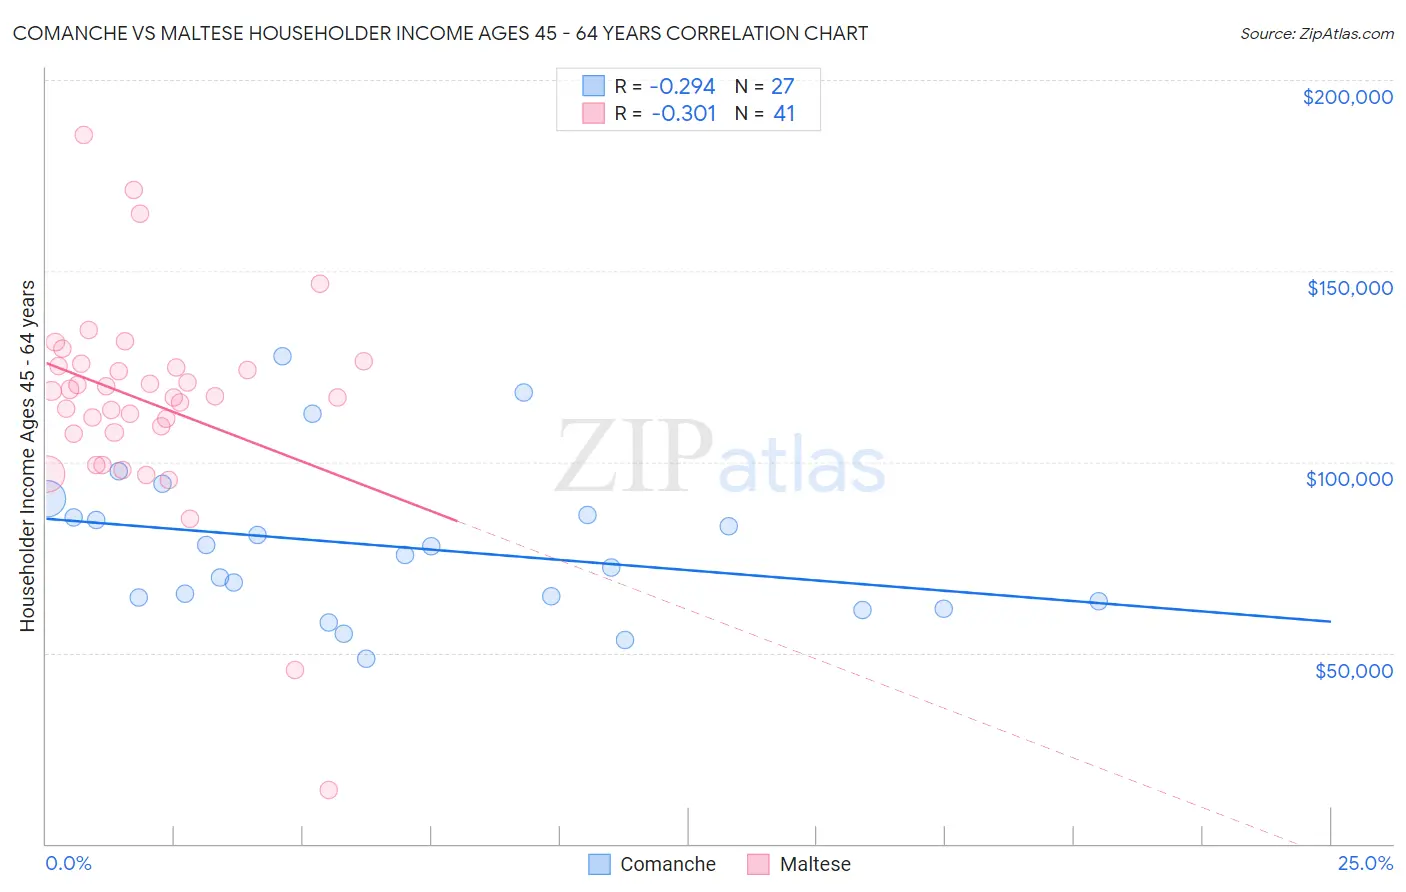 Comanche vs Maltese Householder Income Ages 45 - 64 years